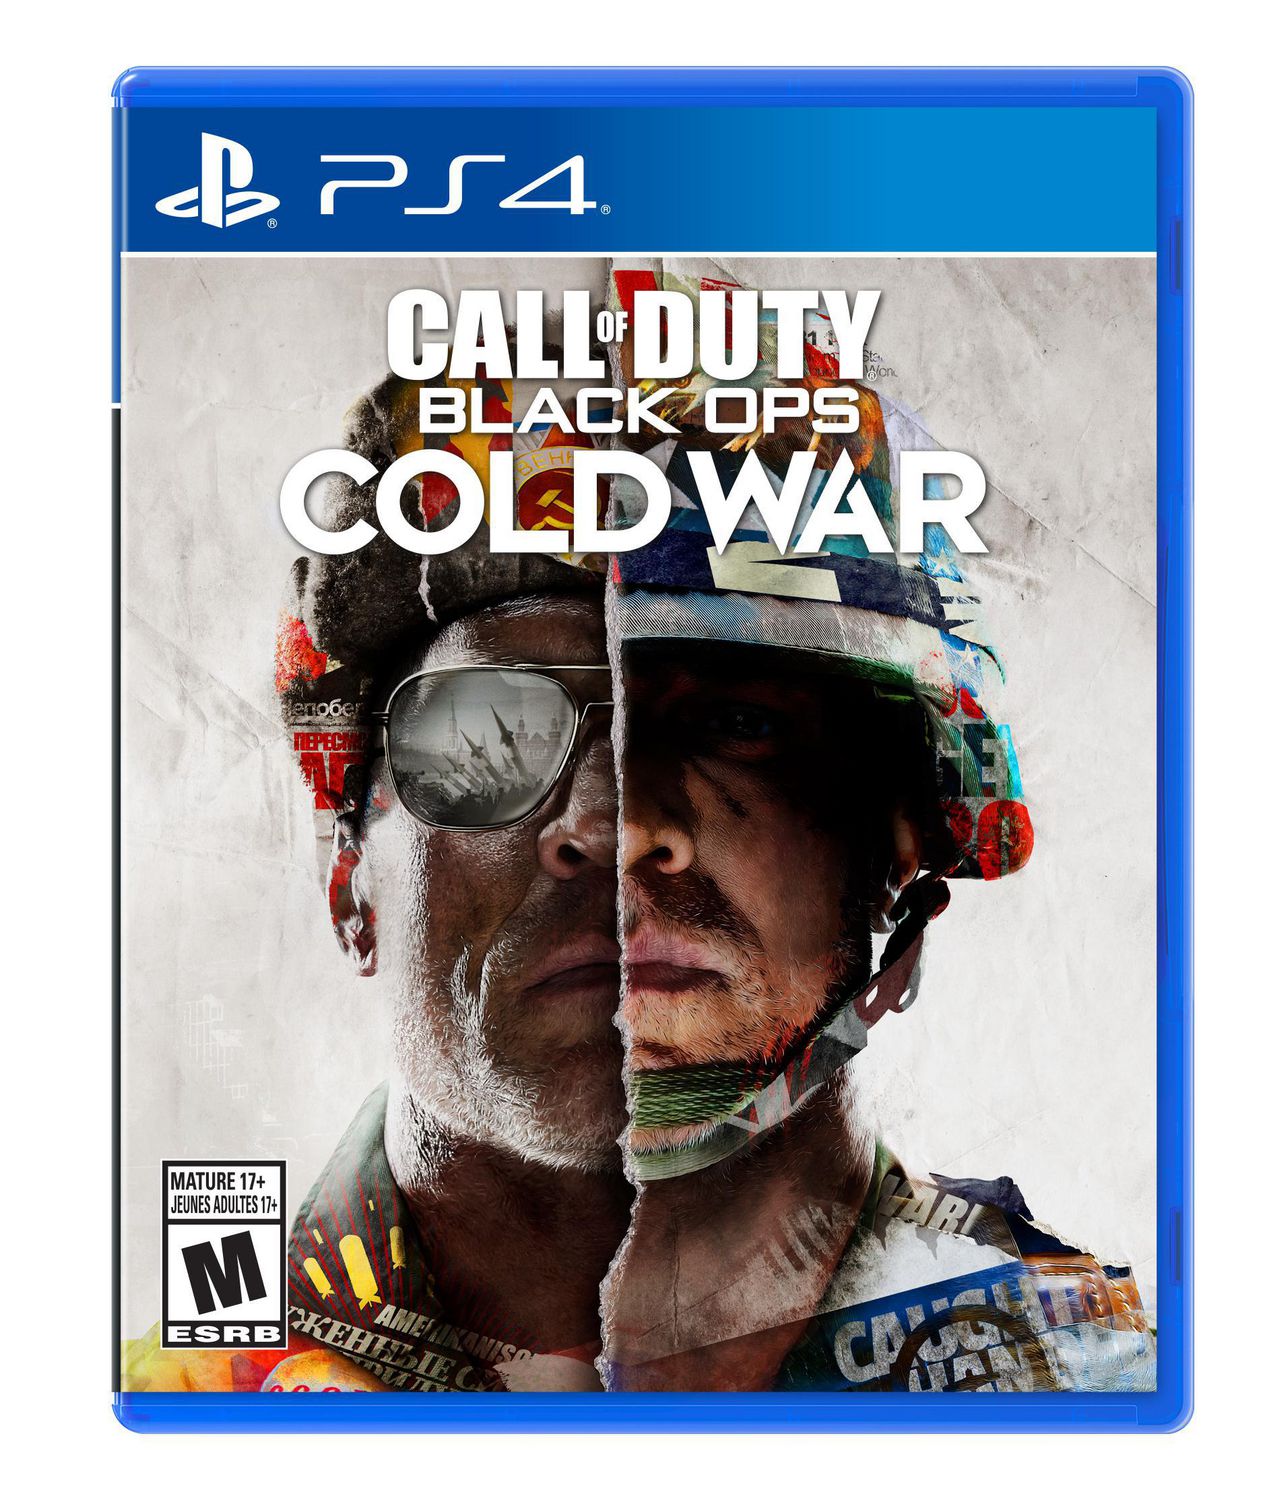 call of duty cold war ps4 ps5